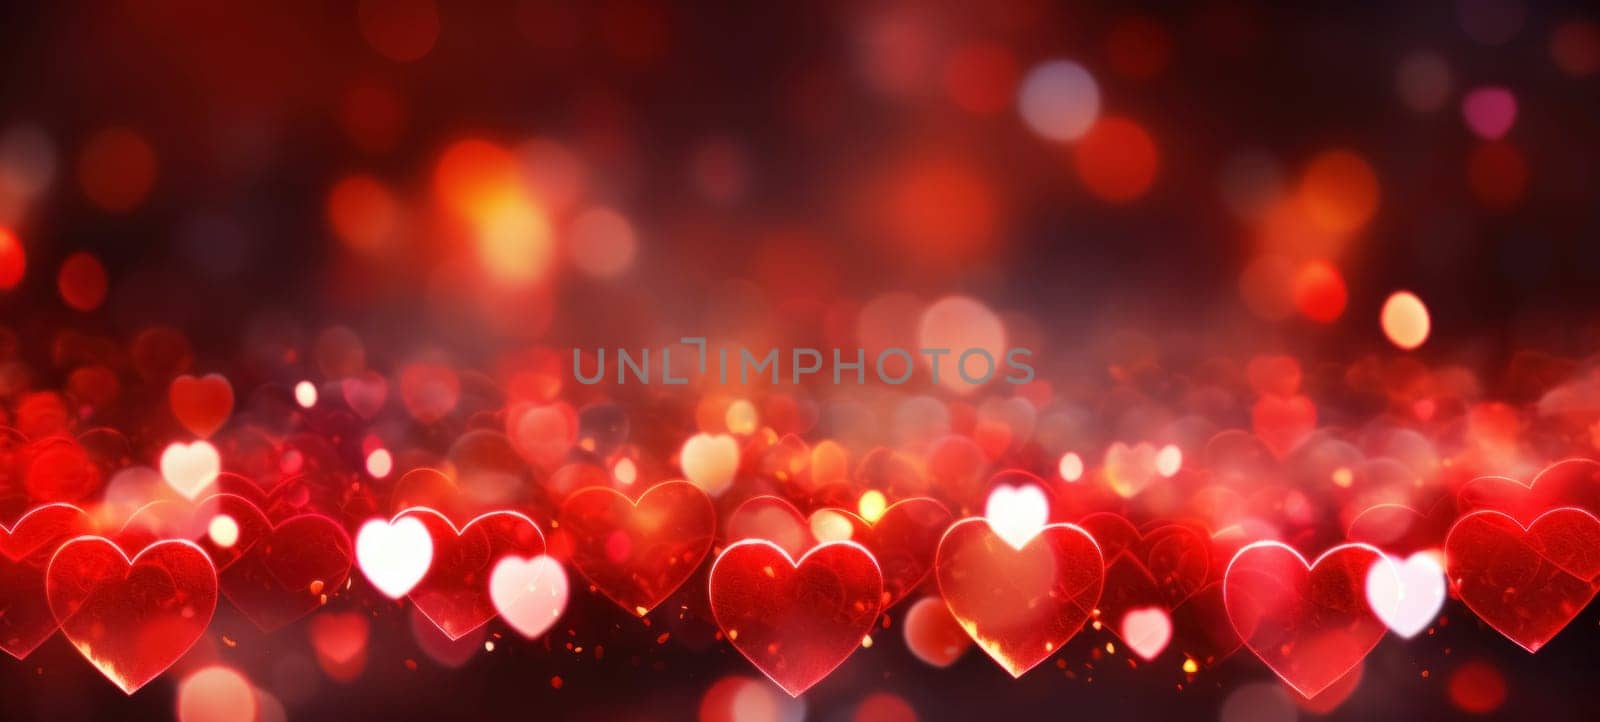 A romantic background filled with red heart-shaped bokeh lights, perfect for expressions of love.